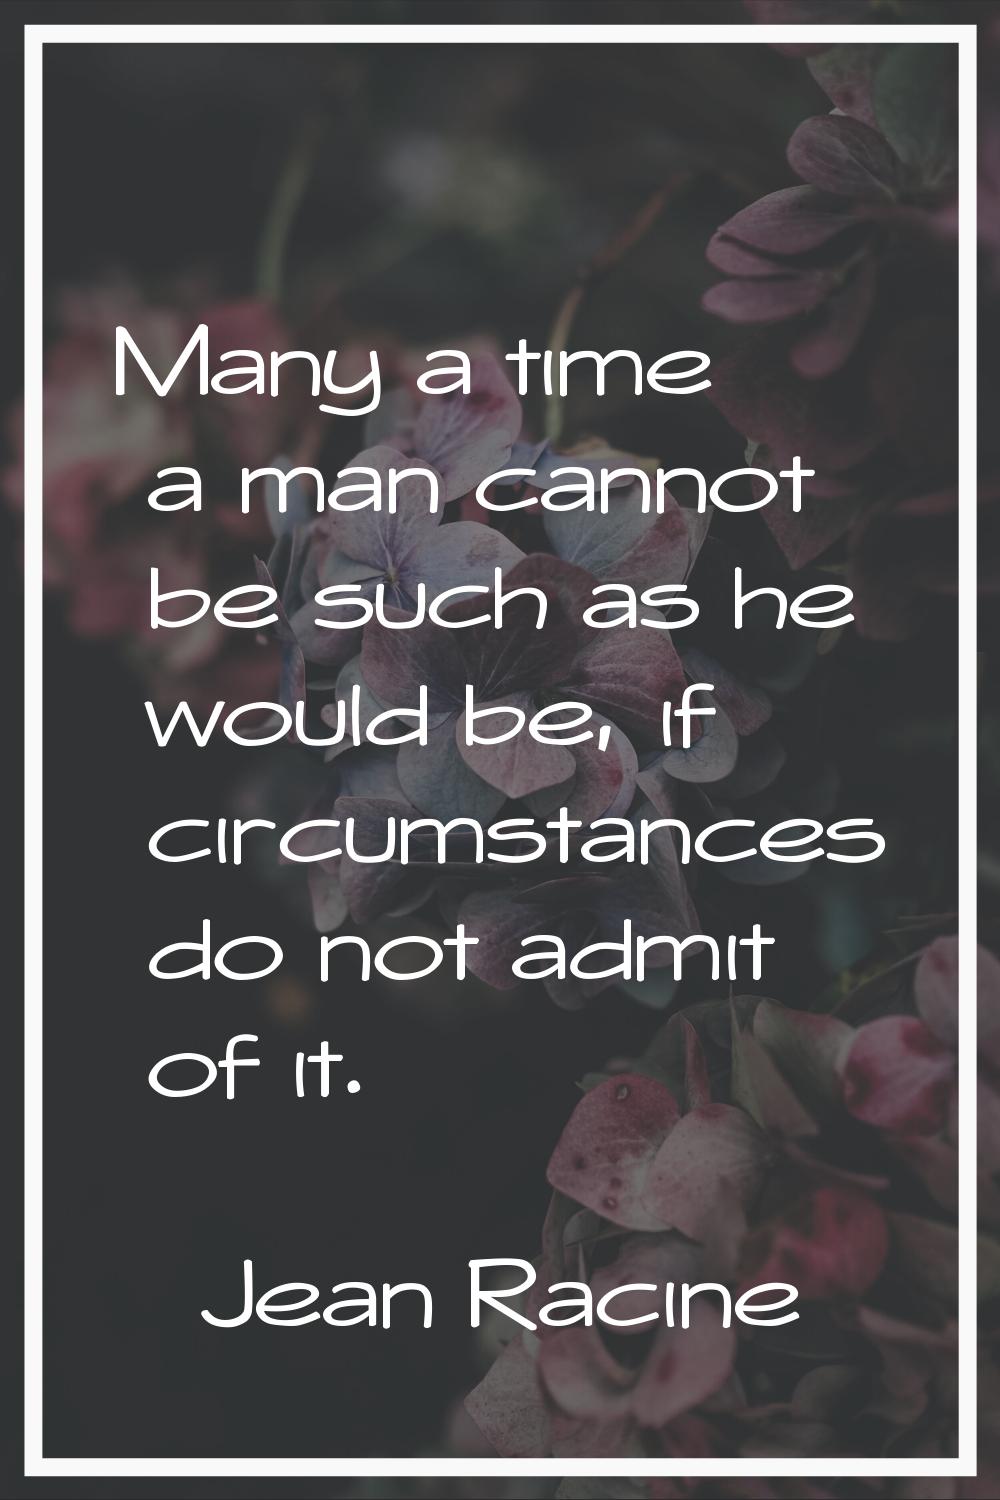 Many a time a man cannot be such as he would be, if circumstances do not admit of it.